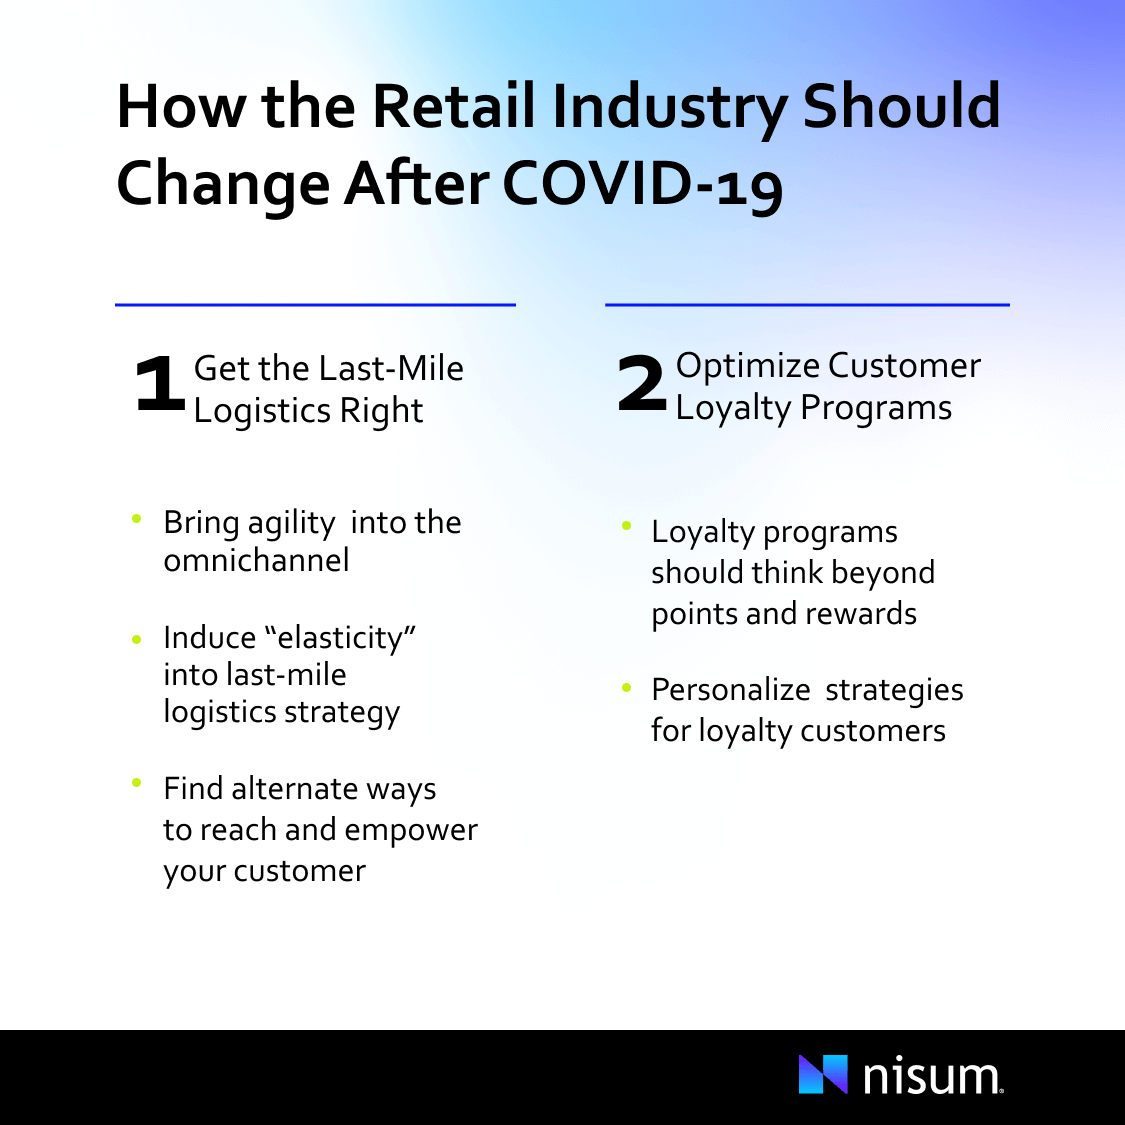 How the Retail Industry Should Change After COVID-19